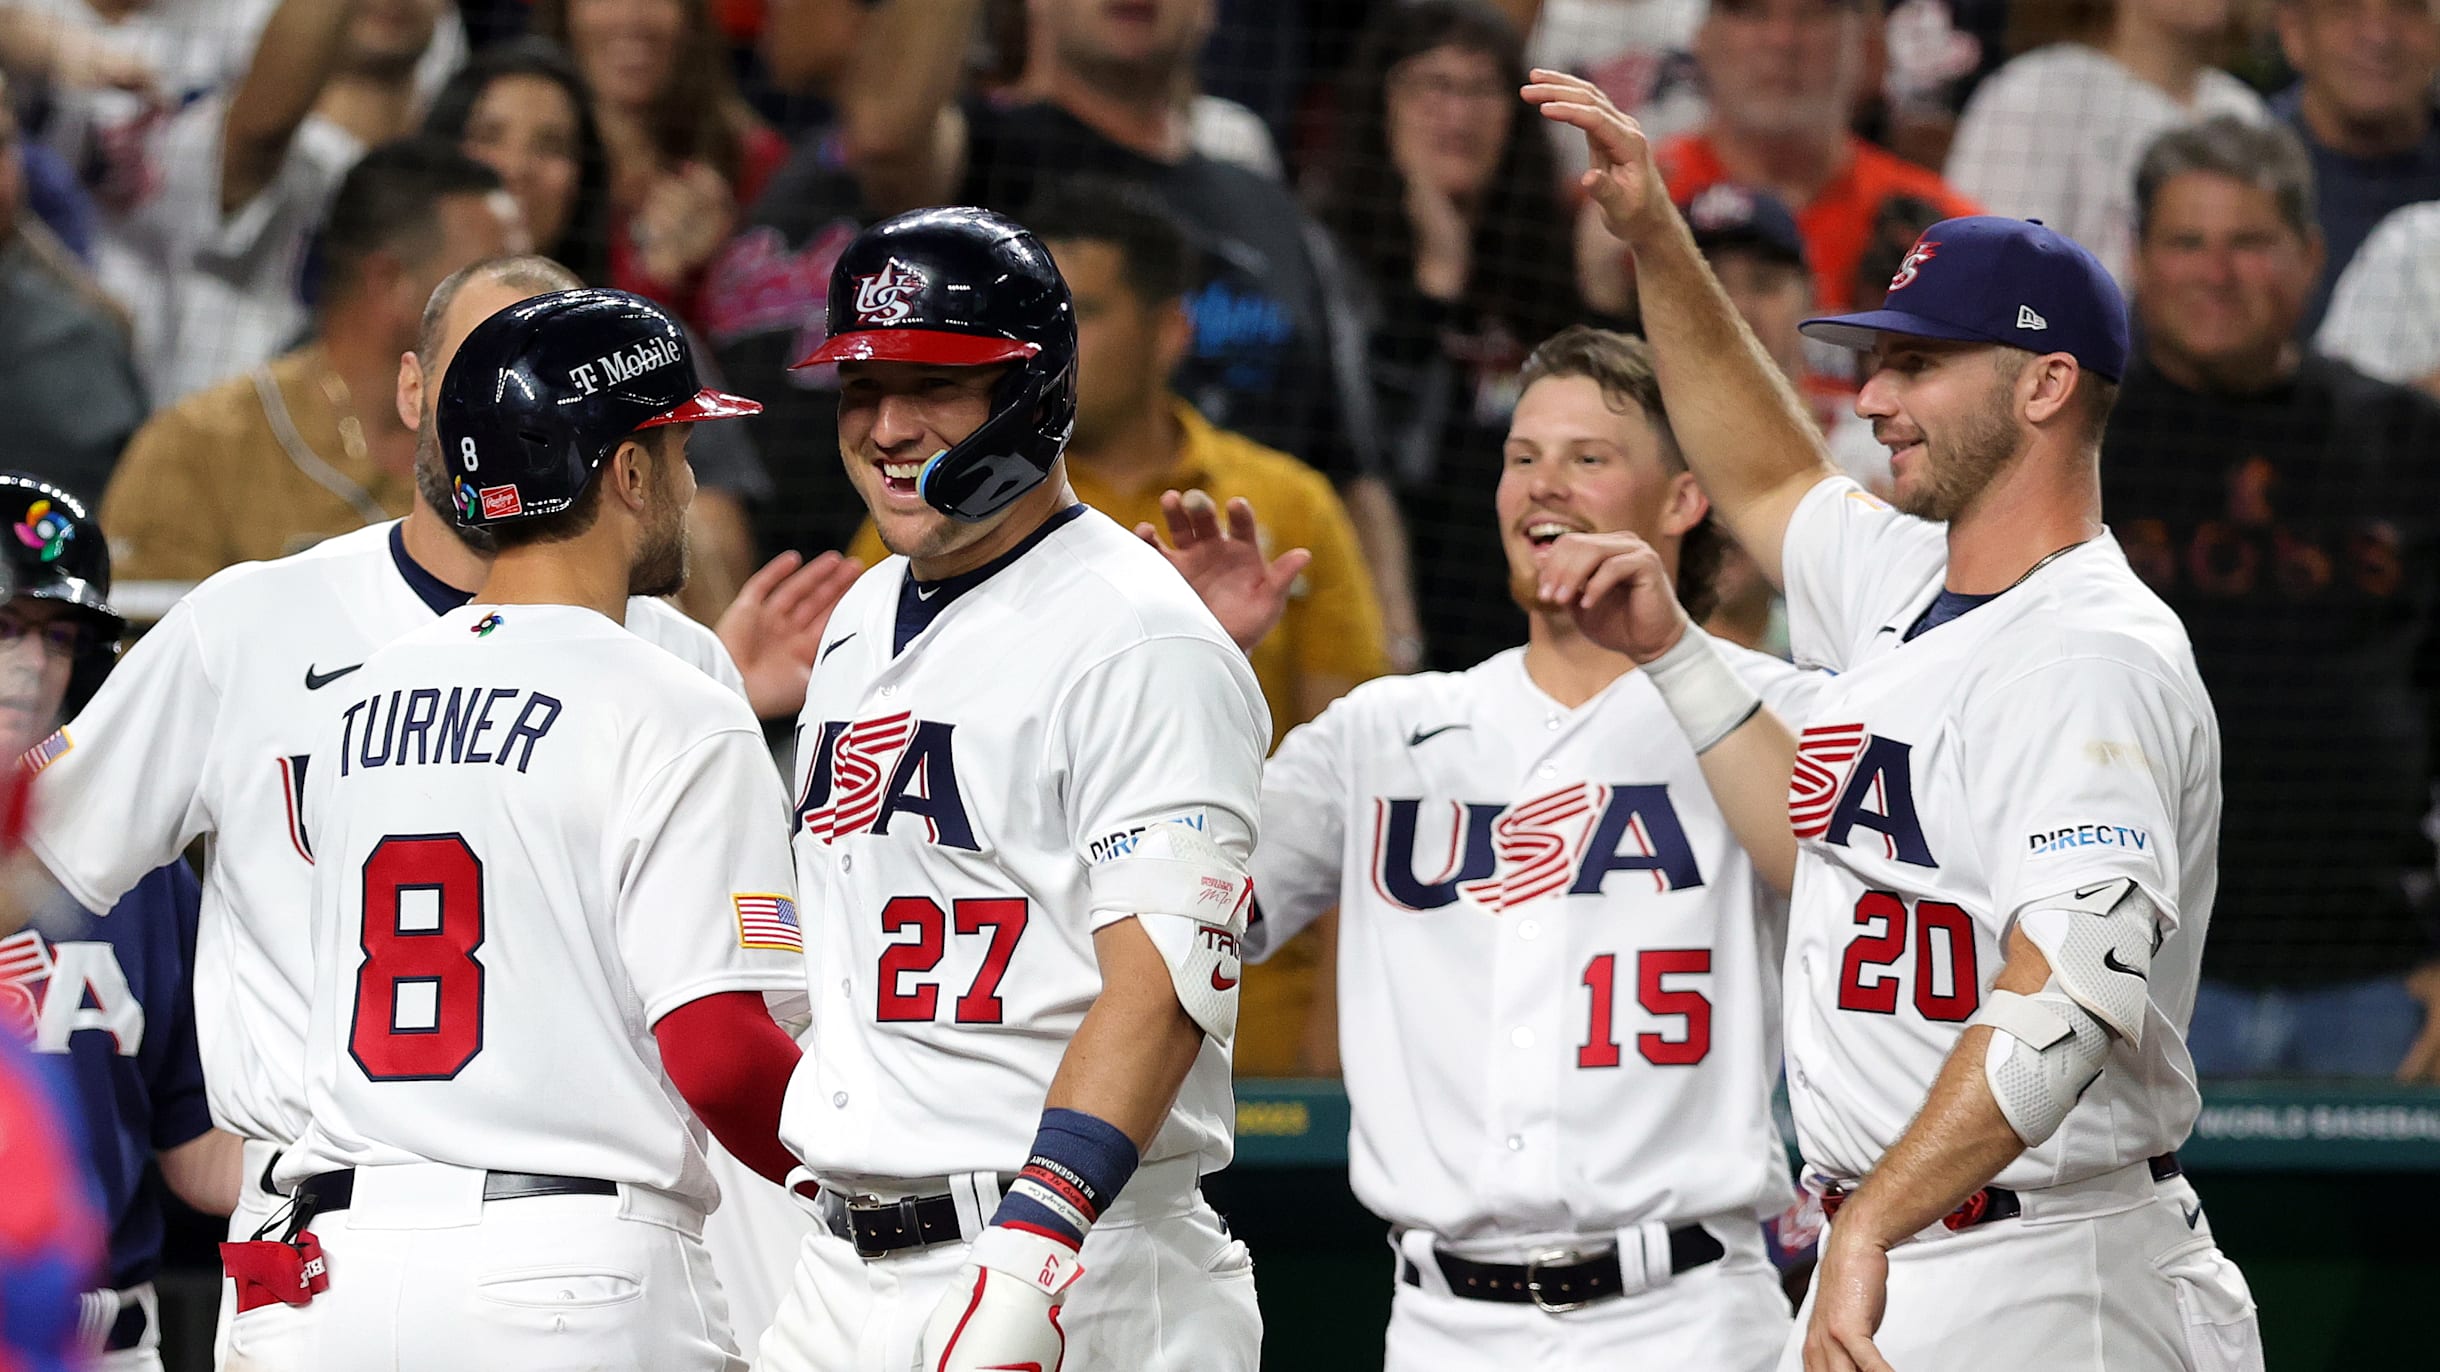 USA in World Baseball Classic 2023 final: Preview, schedule, and